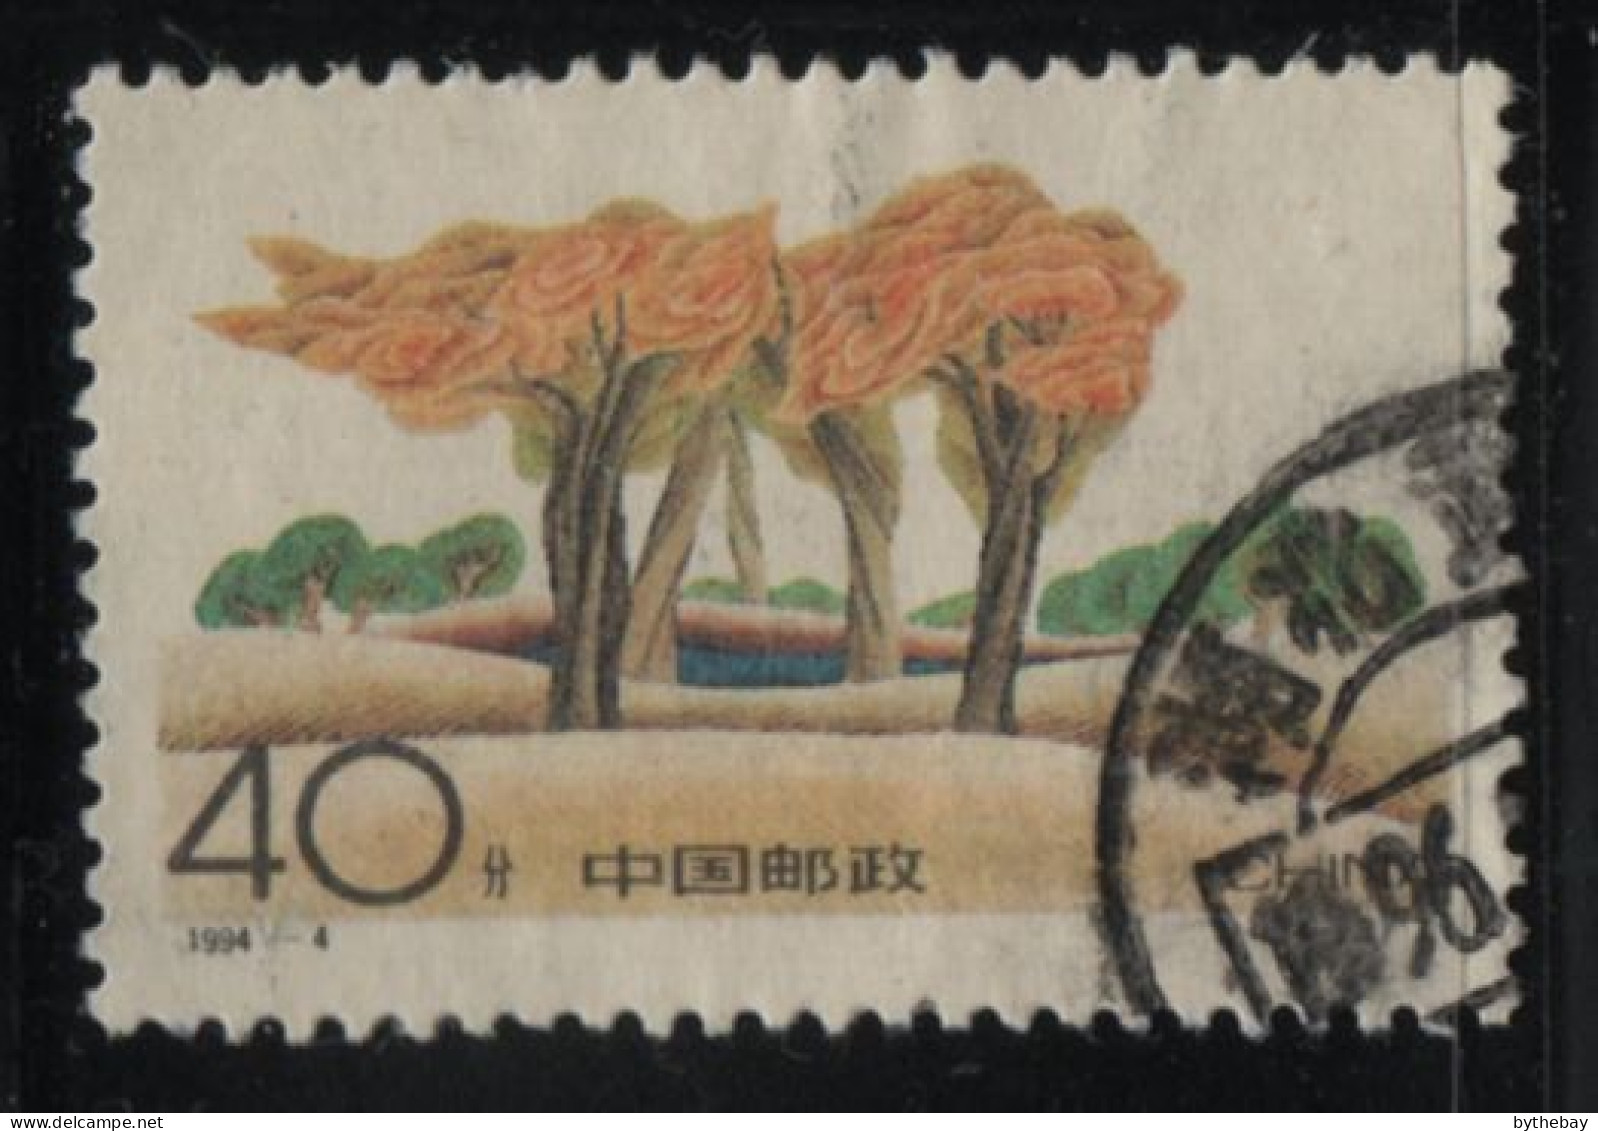 China People's Republic 1994 Used Sc 2493 40f Forest Of Poplars - Used Stamps